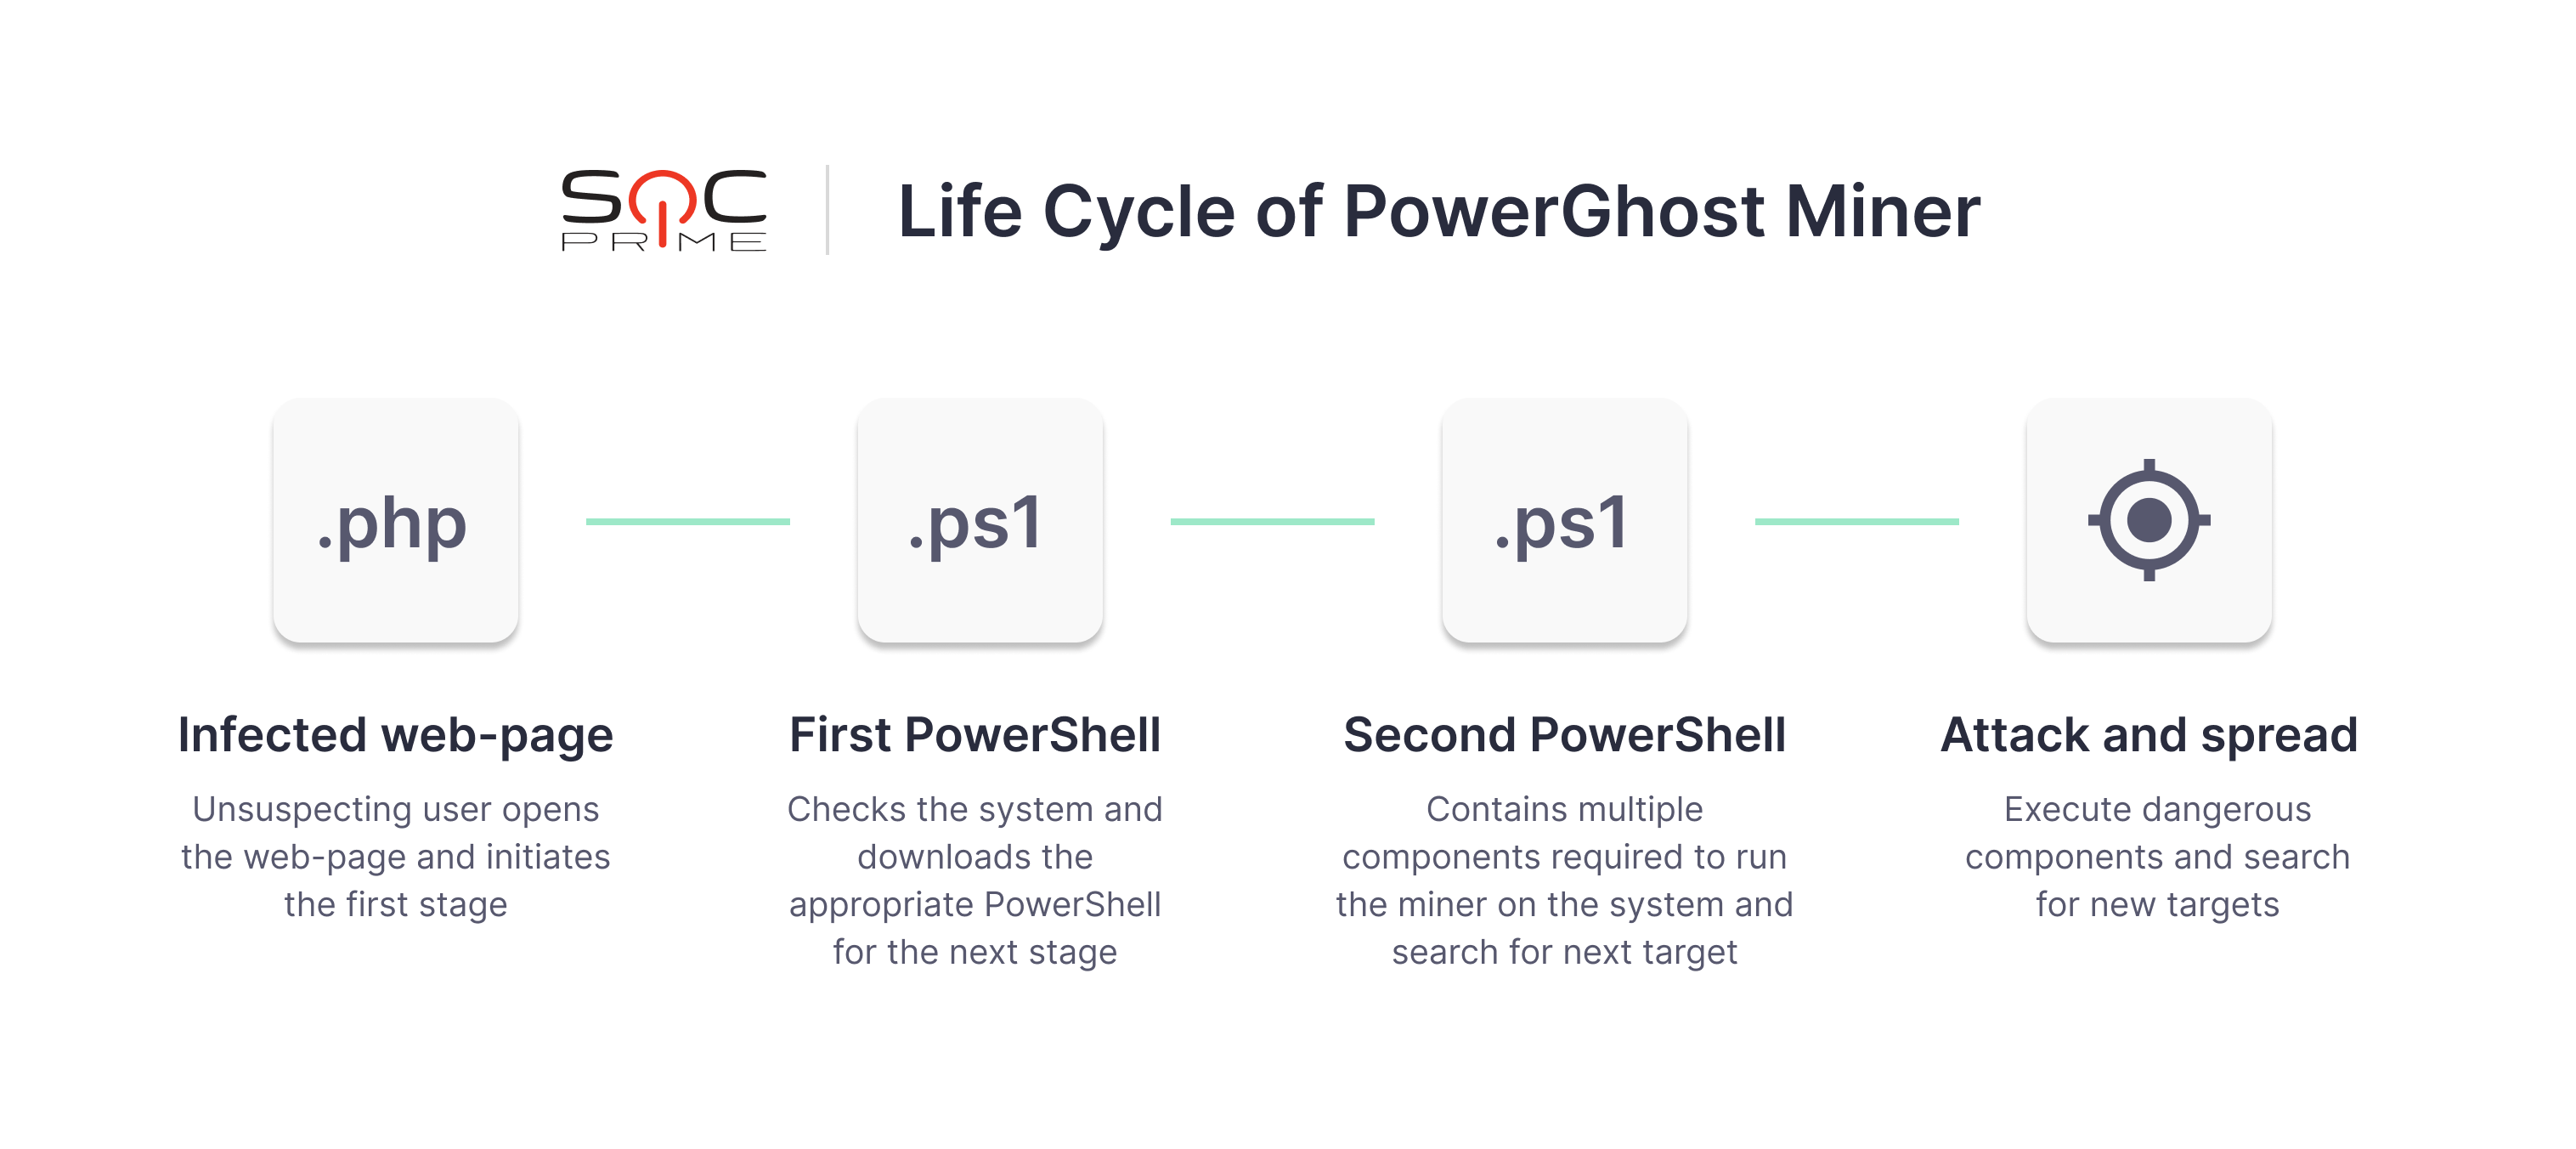 Lifecycle of PowerGhost Miner